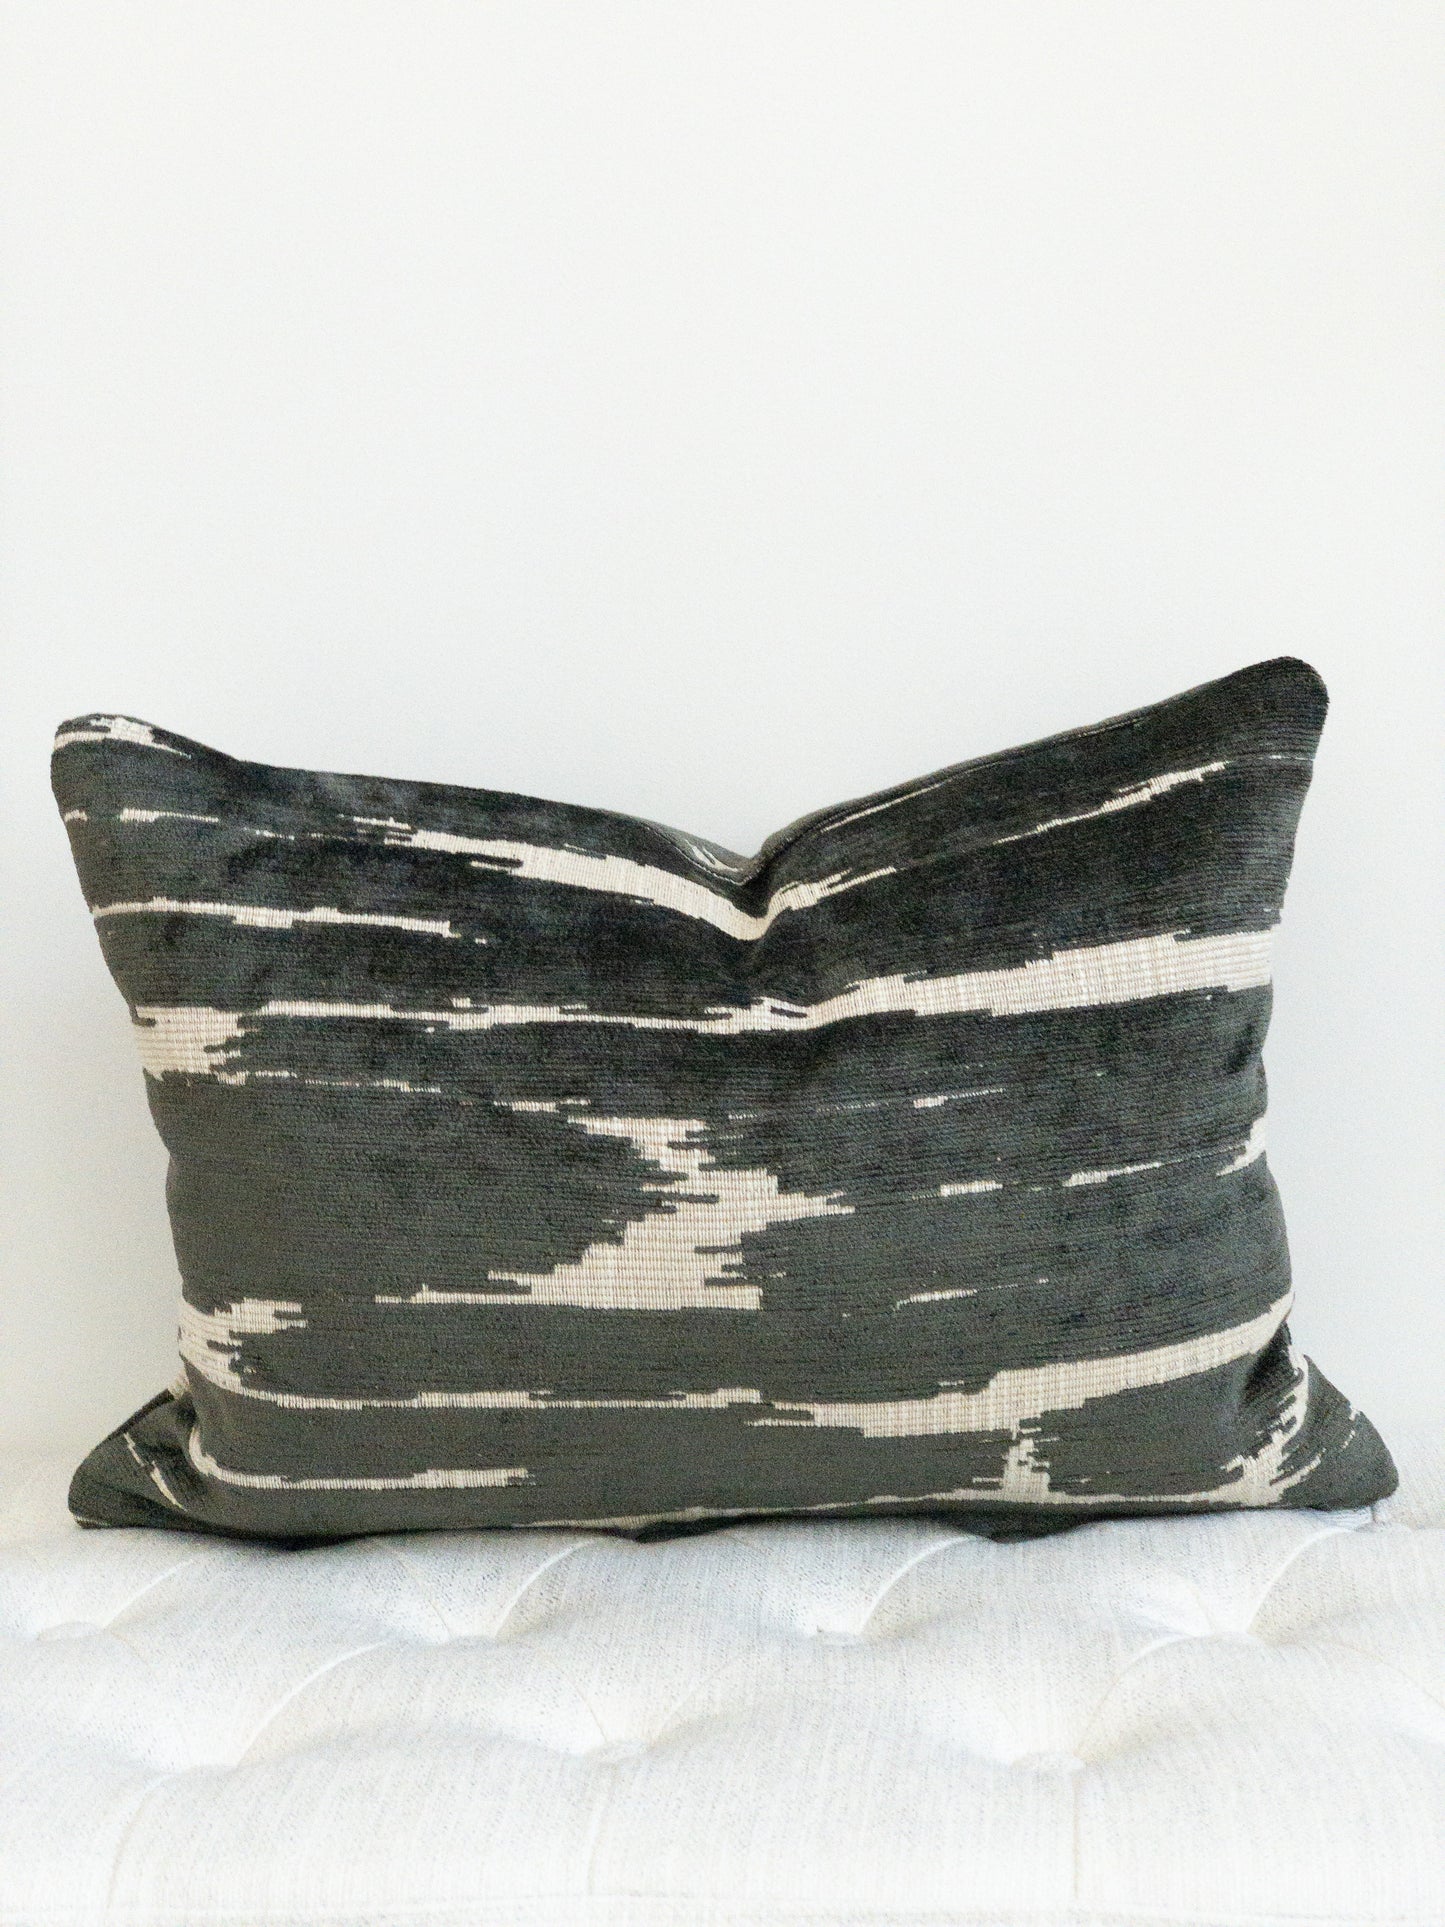 Black and beige chenille lumbar pillow.  Black raised threads on flat beige background.  Abstract placement of alternating colors.